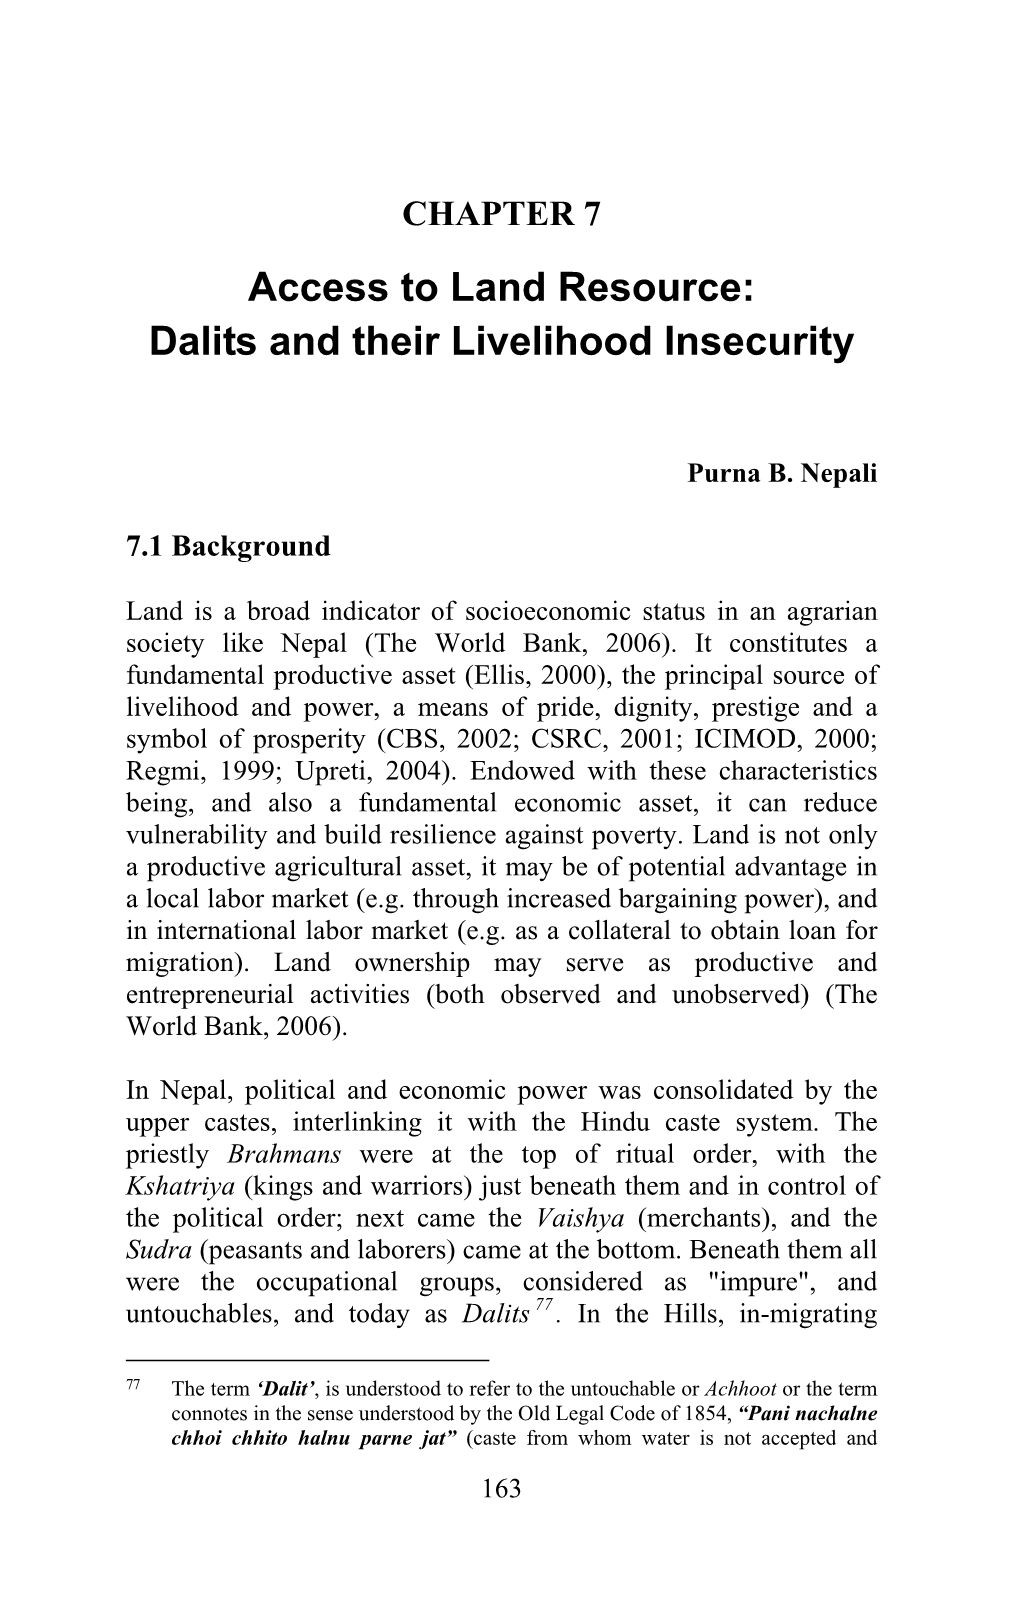 Access to Land Resource: Dalits and Their Livelihood Insecurity